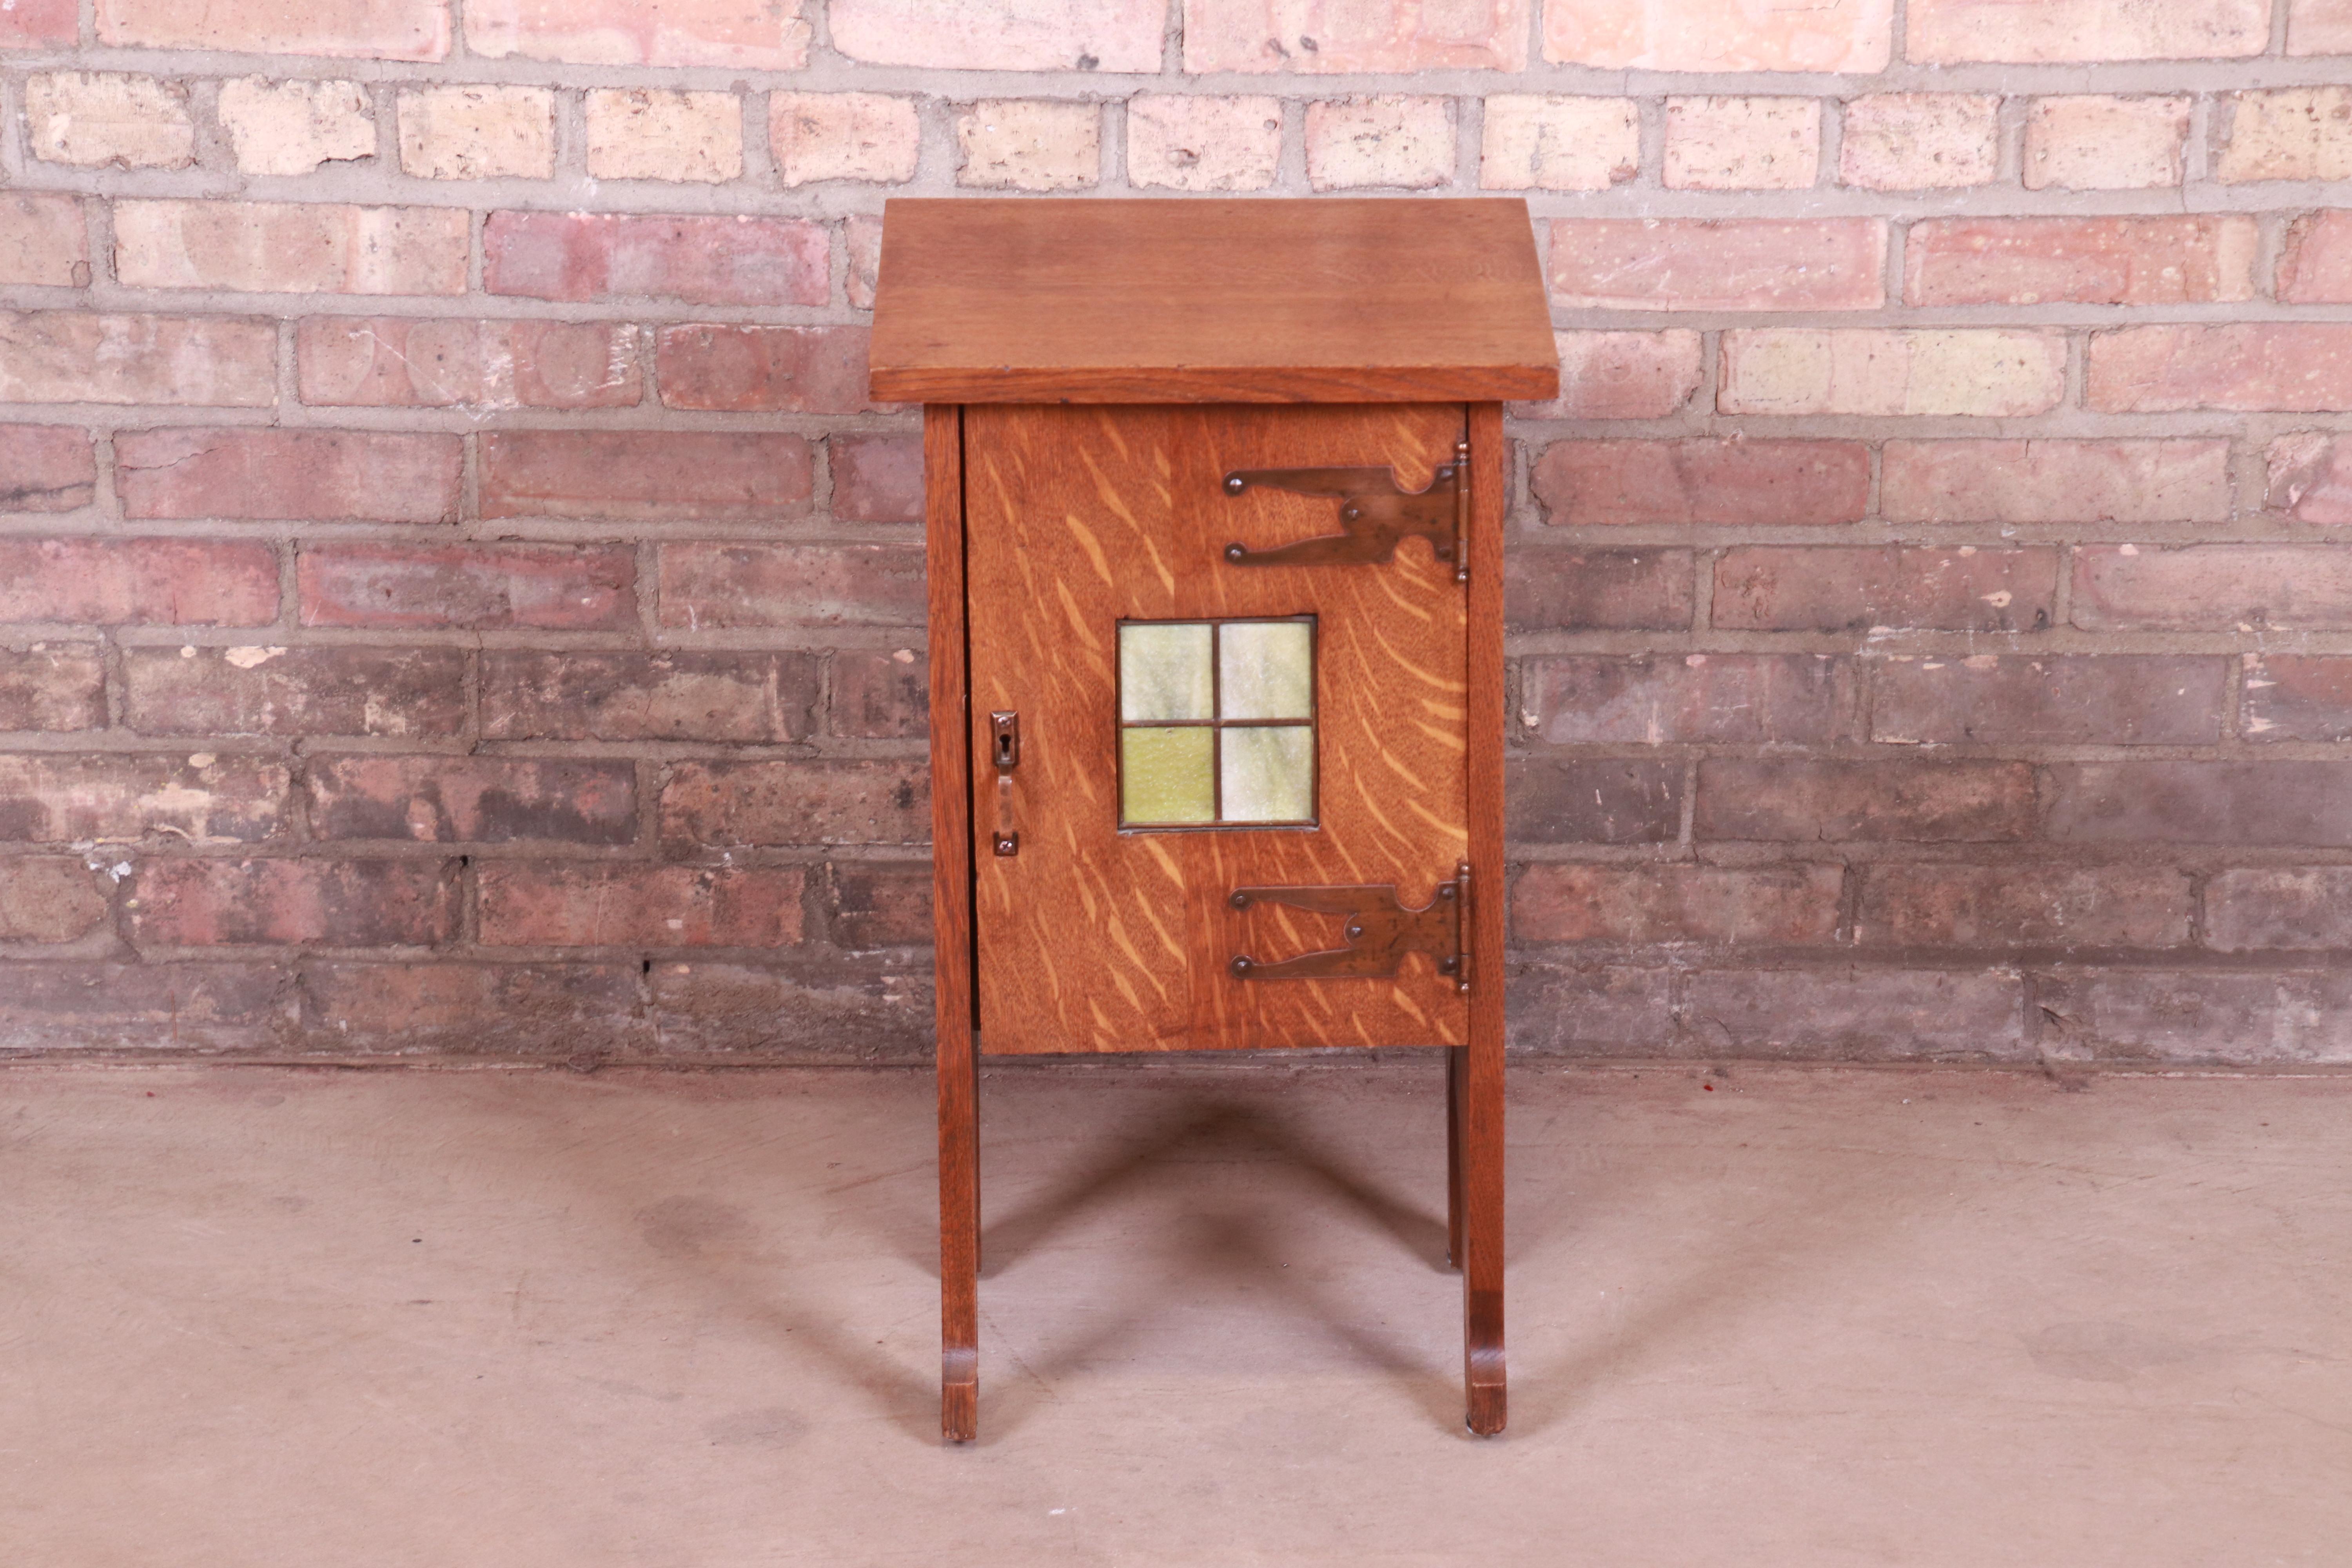 Arts and Crafts Antique Arts & Crafts Oak Side Table with Stained Glass Tile Insert, circa 1900